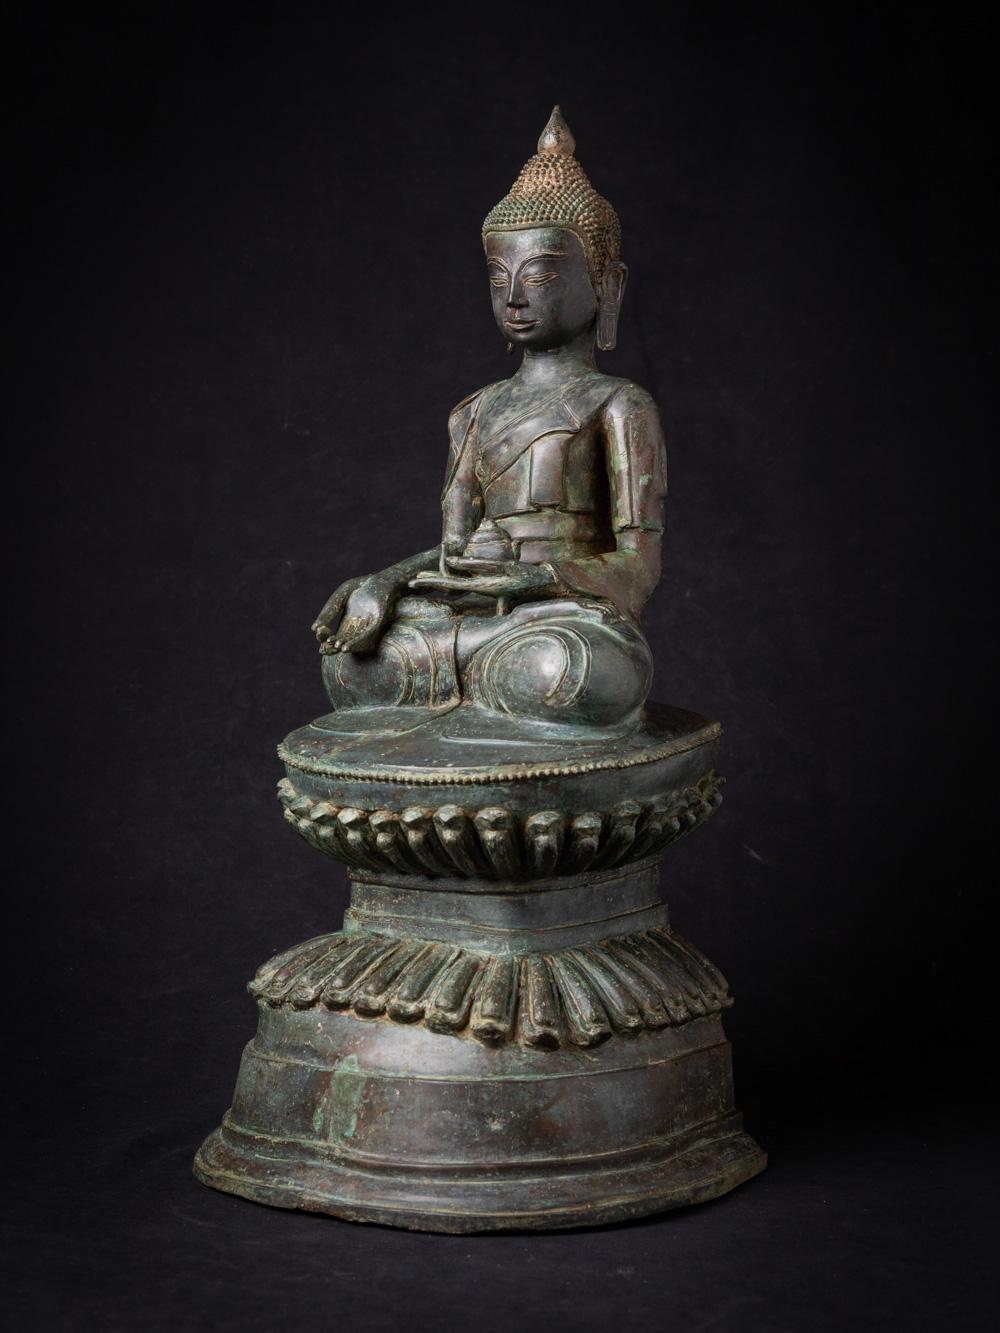 The old bronze Burmese Buddha statue is a captivating and spiritually significant artifact originating from Burma. Crafted from bronze, this statue stands at 56 cm in height and measures 29.5 cm in width and 25.2 cm in depth. The statue is created